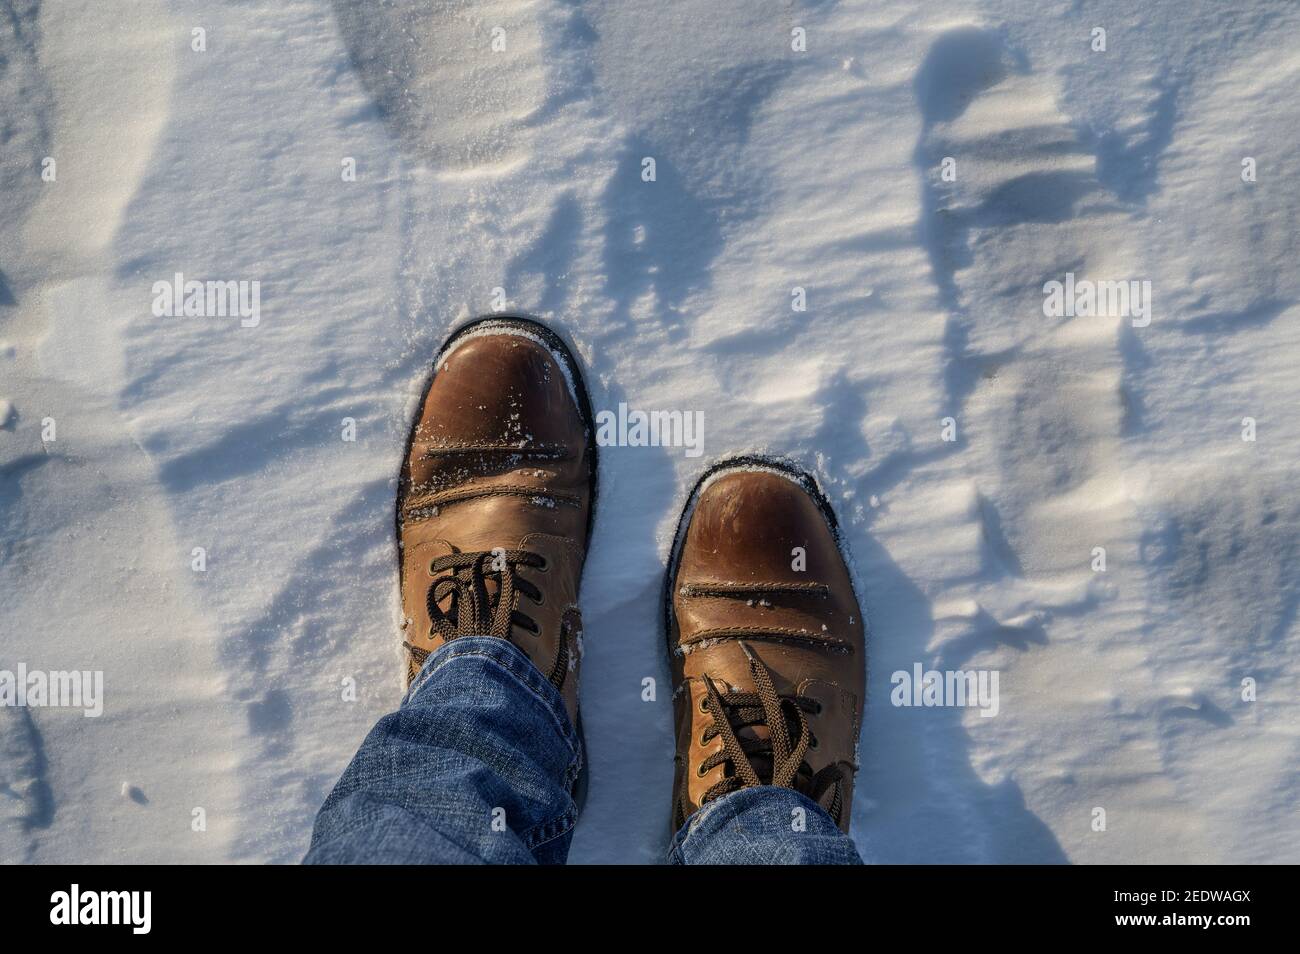 Top view of boots on frozen sea surface. Stock Photo